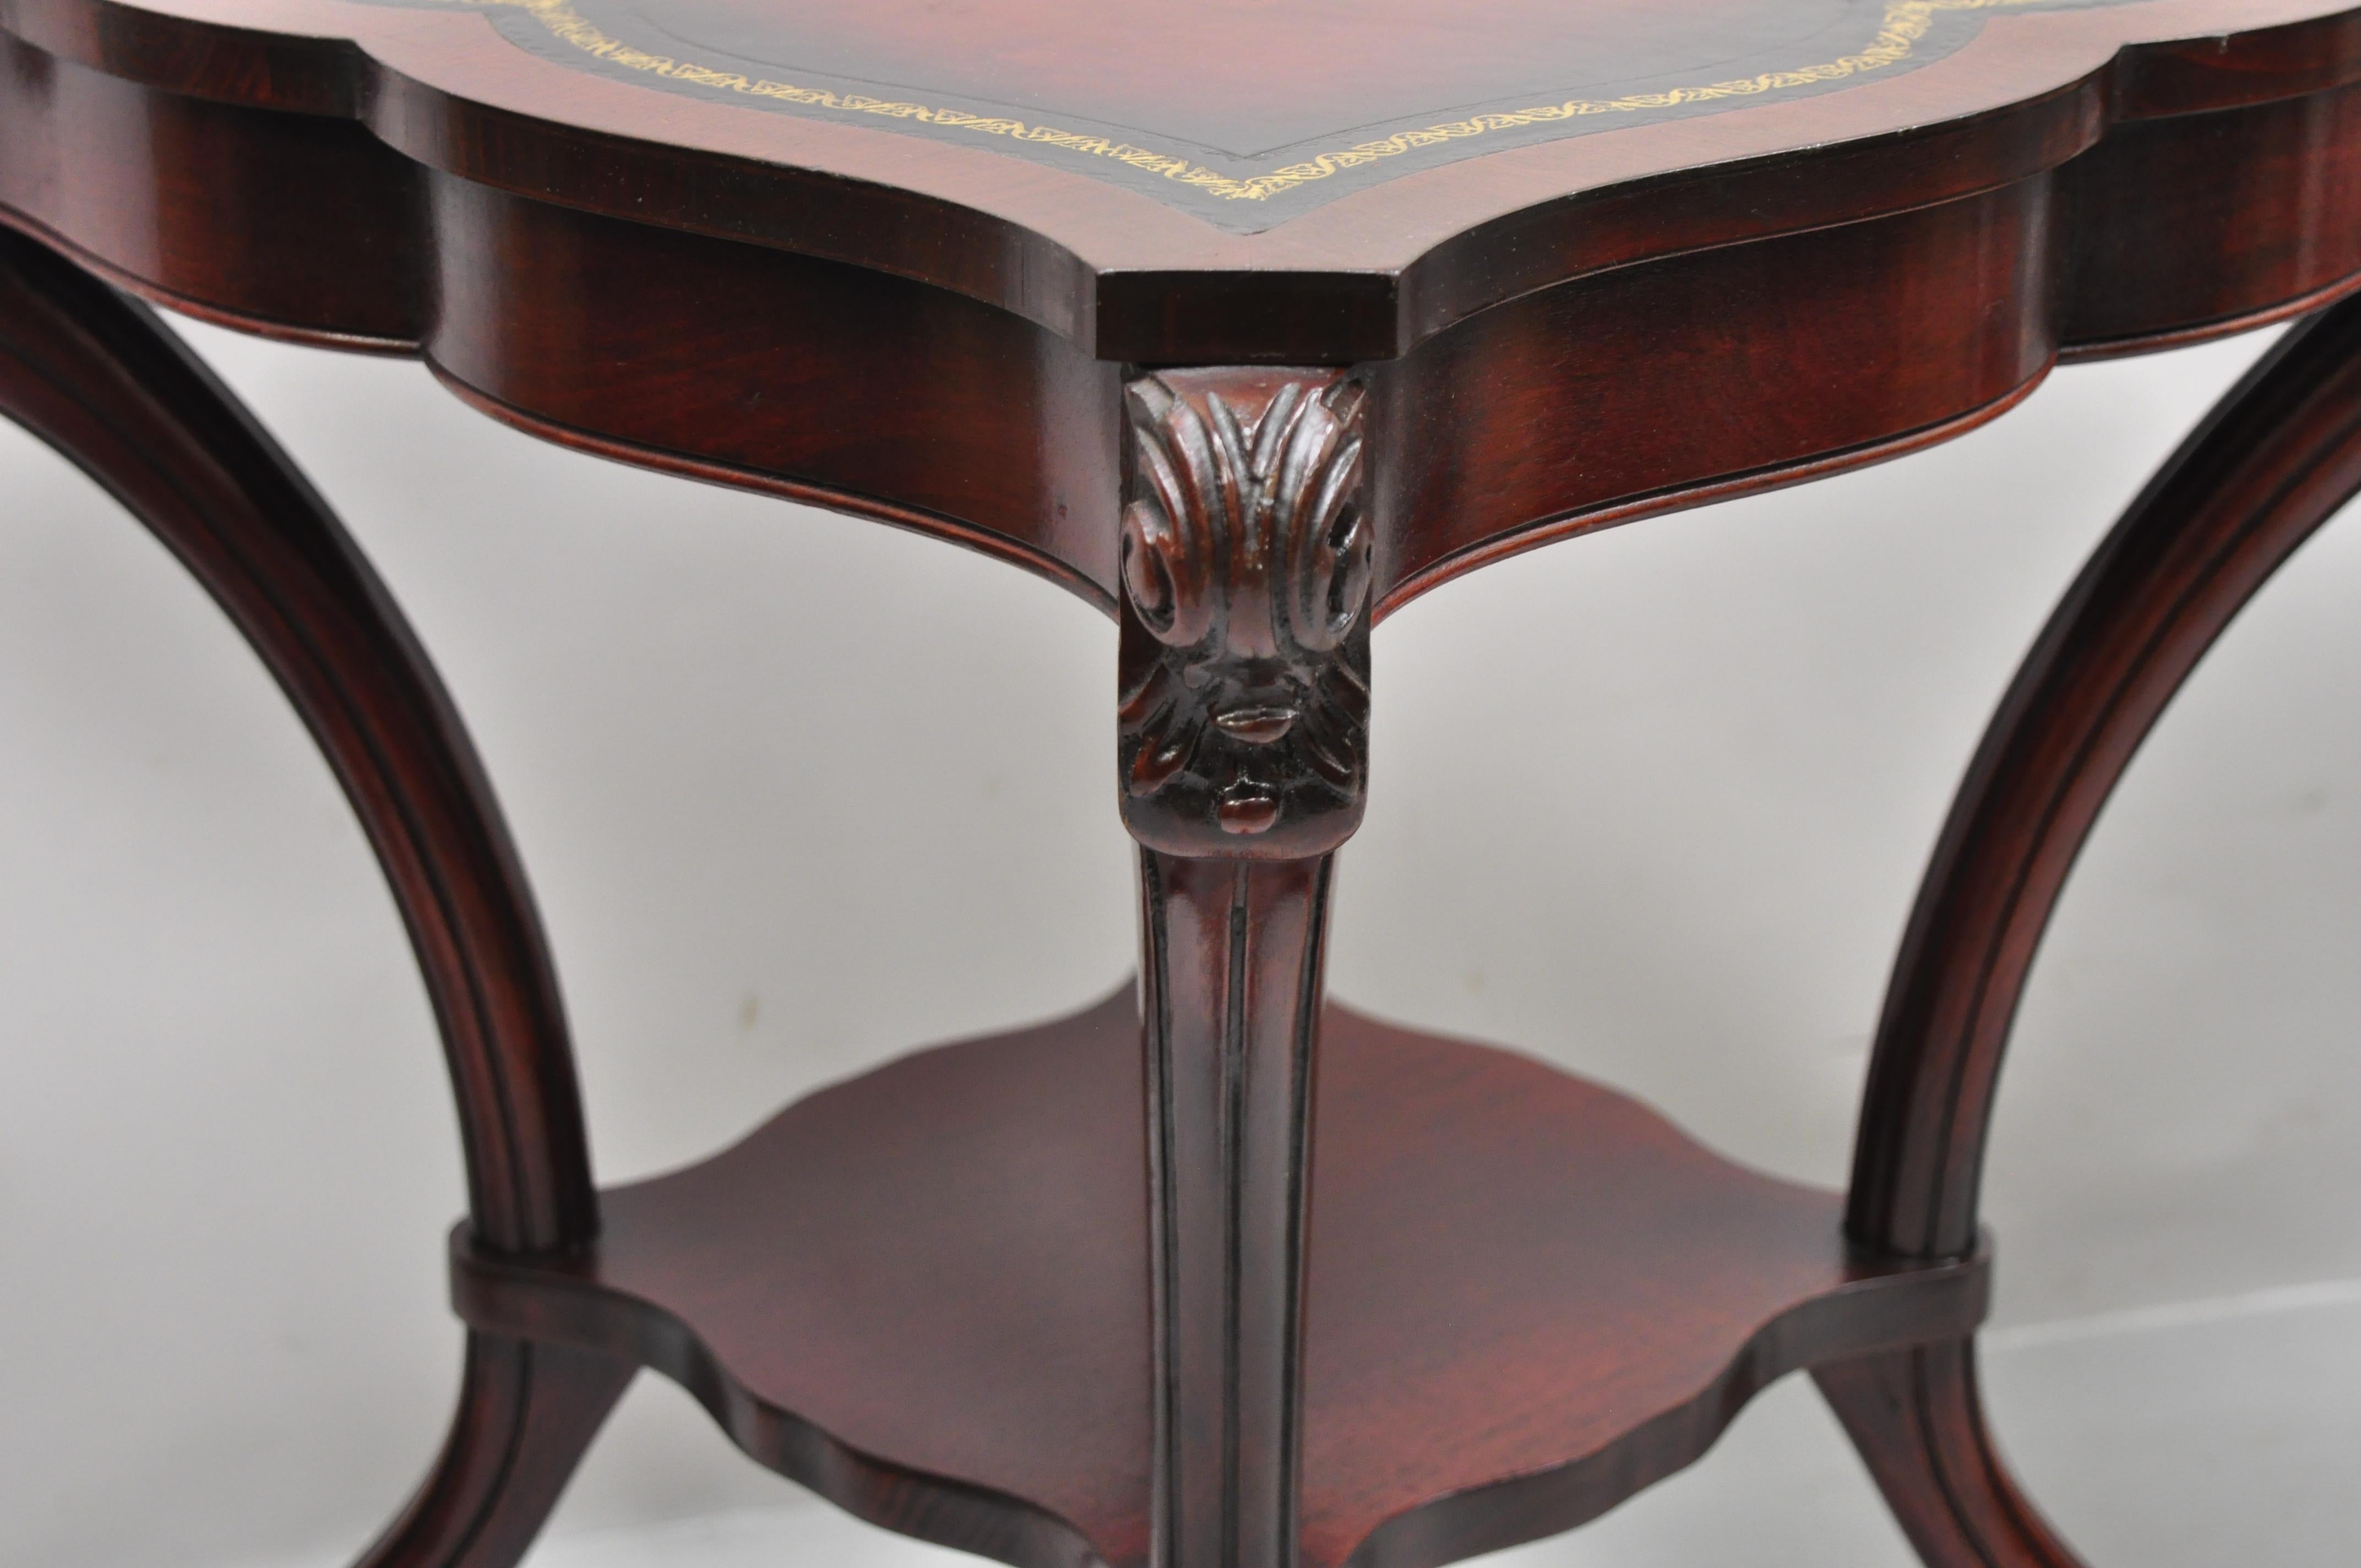 Vintage French Regency Style Red Leather Top Mahogany Lamp End Tables, a Pair For Sale 2